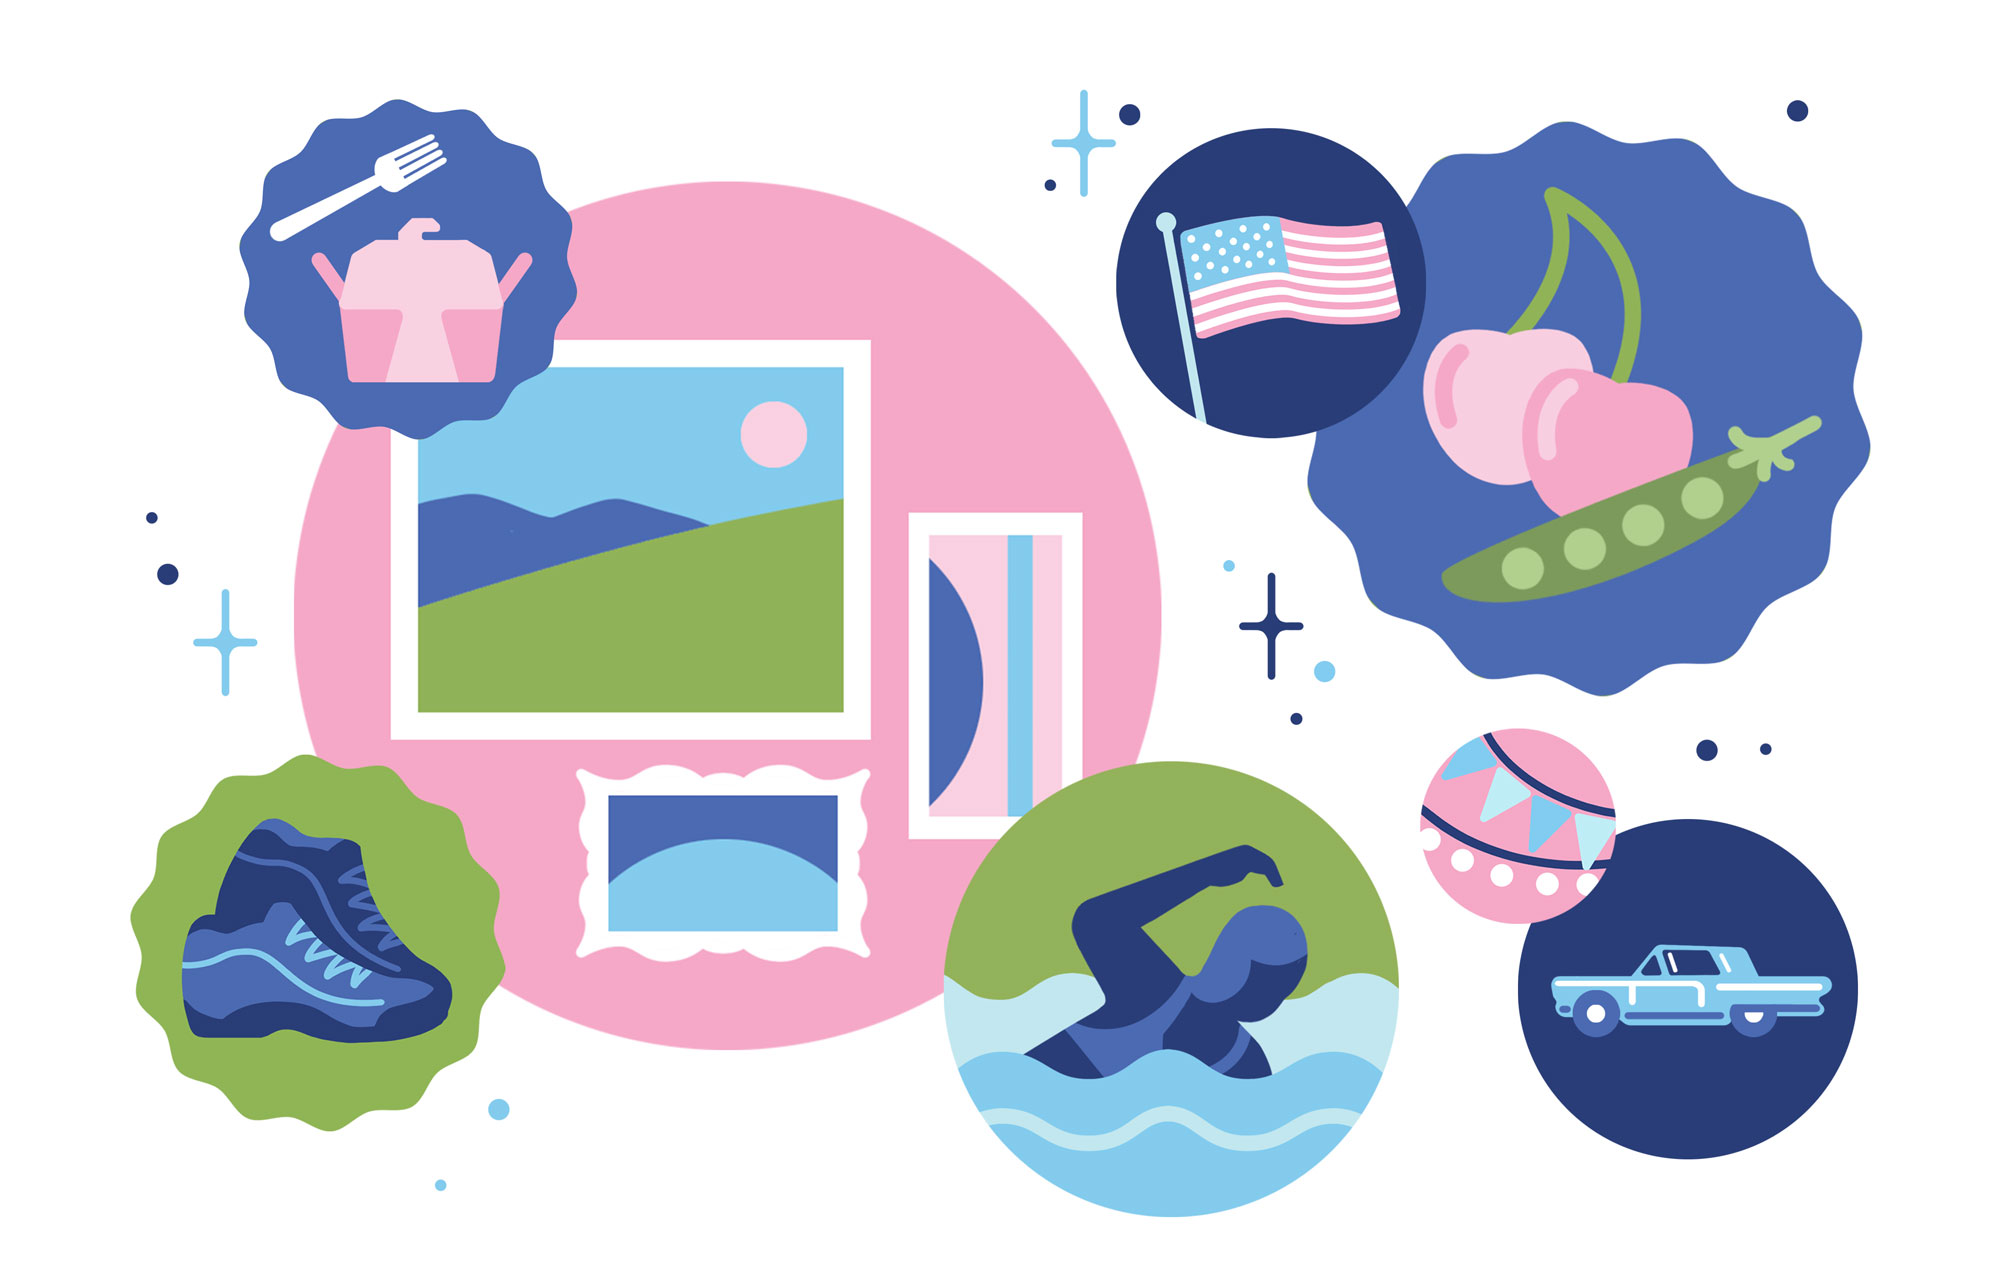 Illustration of icons representing aquatic activities, arts, exhibits and expos, exercise, festivals and parades, food and drink, fourth of July, markets and more.